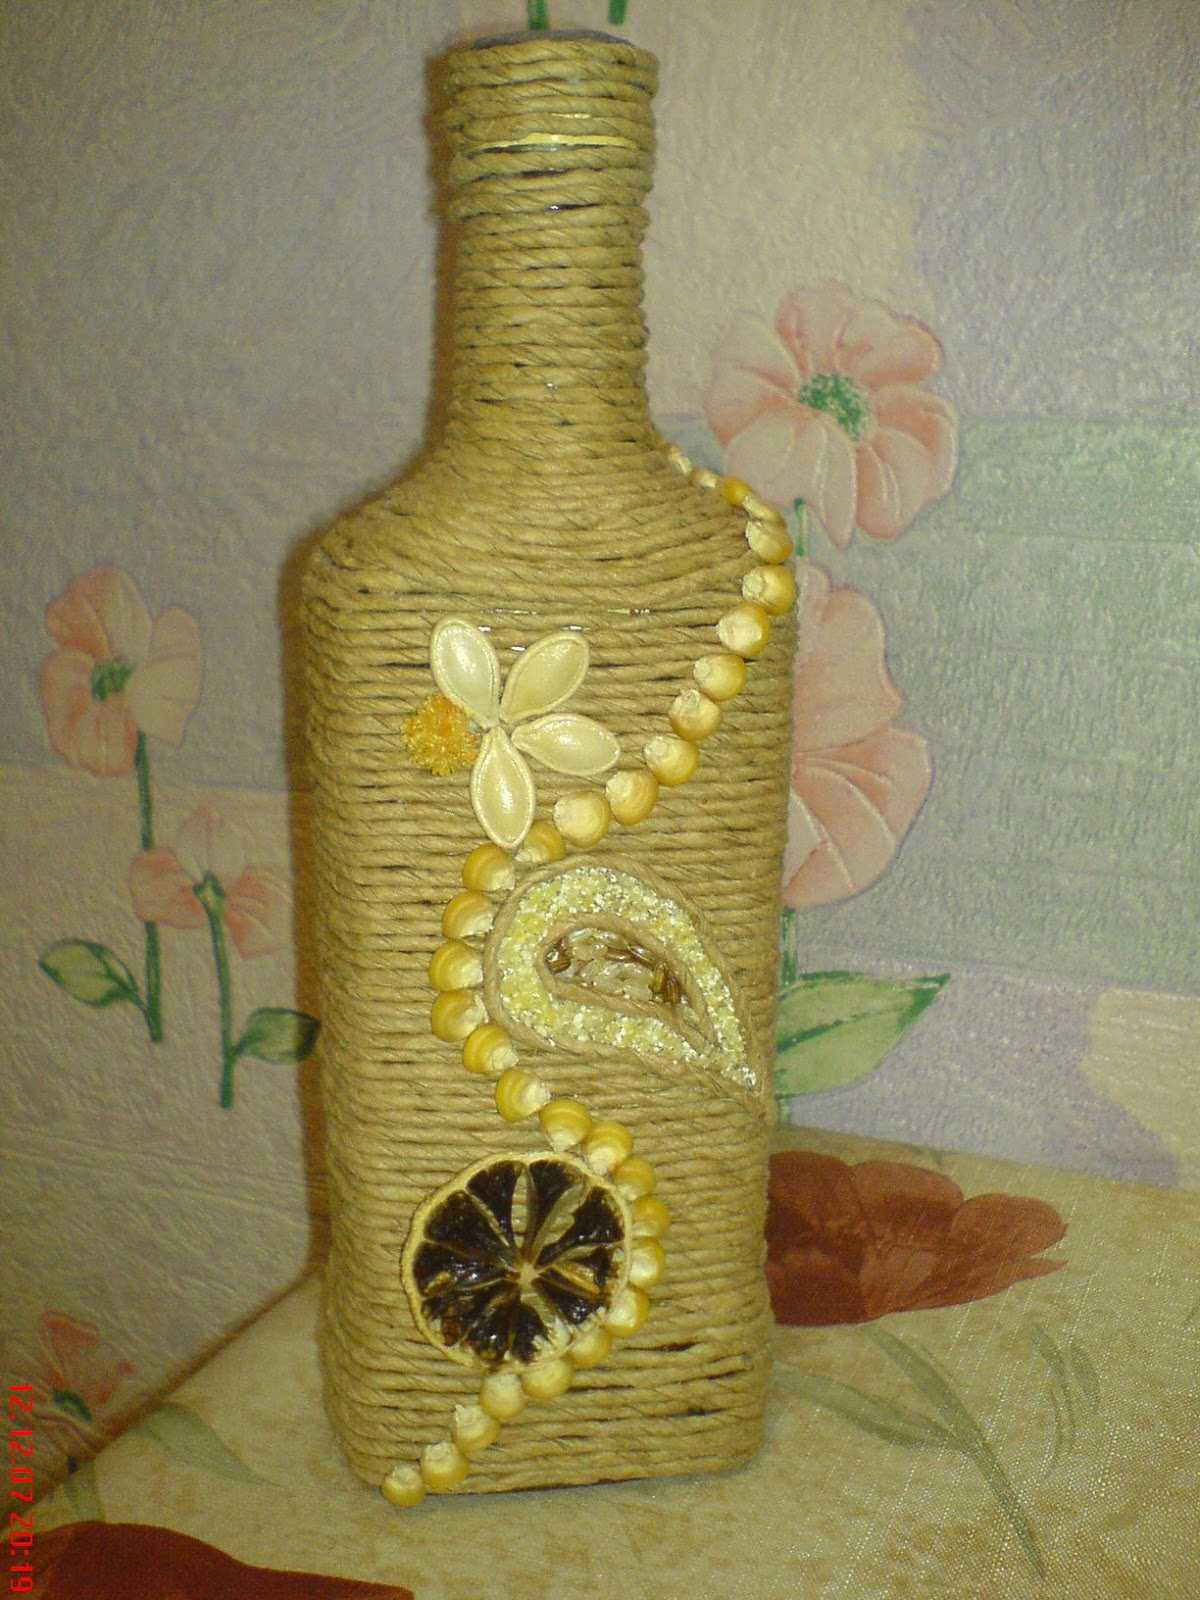 a variant of the original decoration of champagne bottles with twine